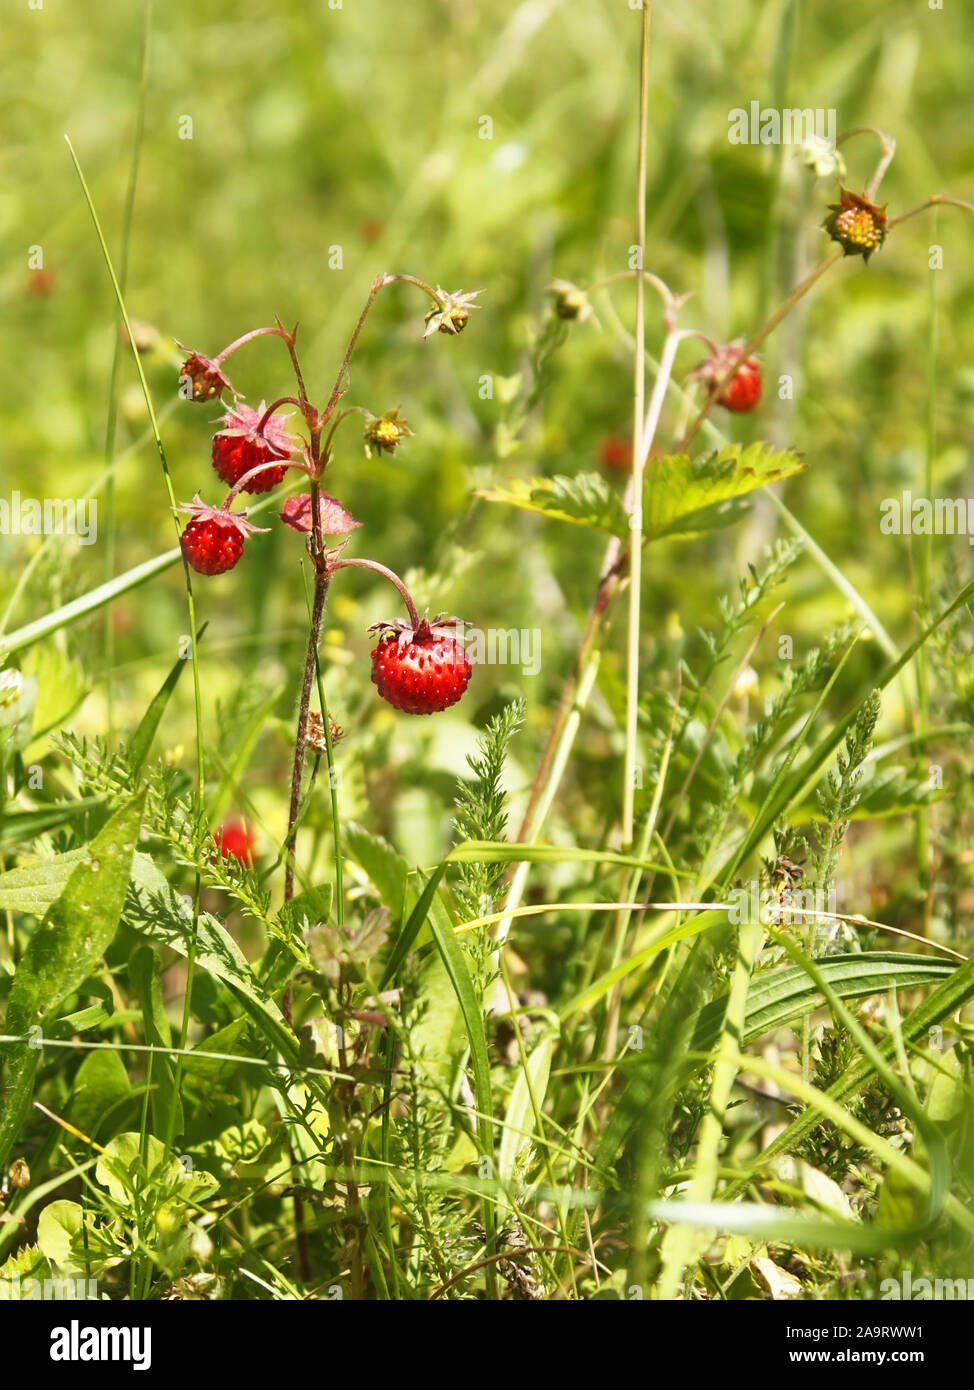 Ripe red berries of wild strawberry (Fragaria vesca) in the meadow among the motley grass, close-up Stock Photo